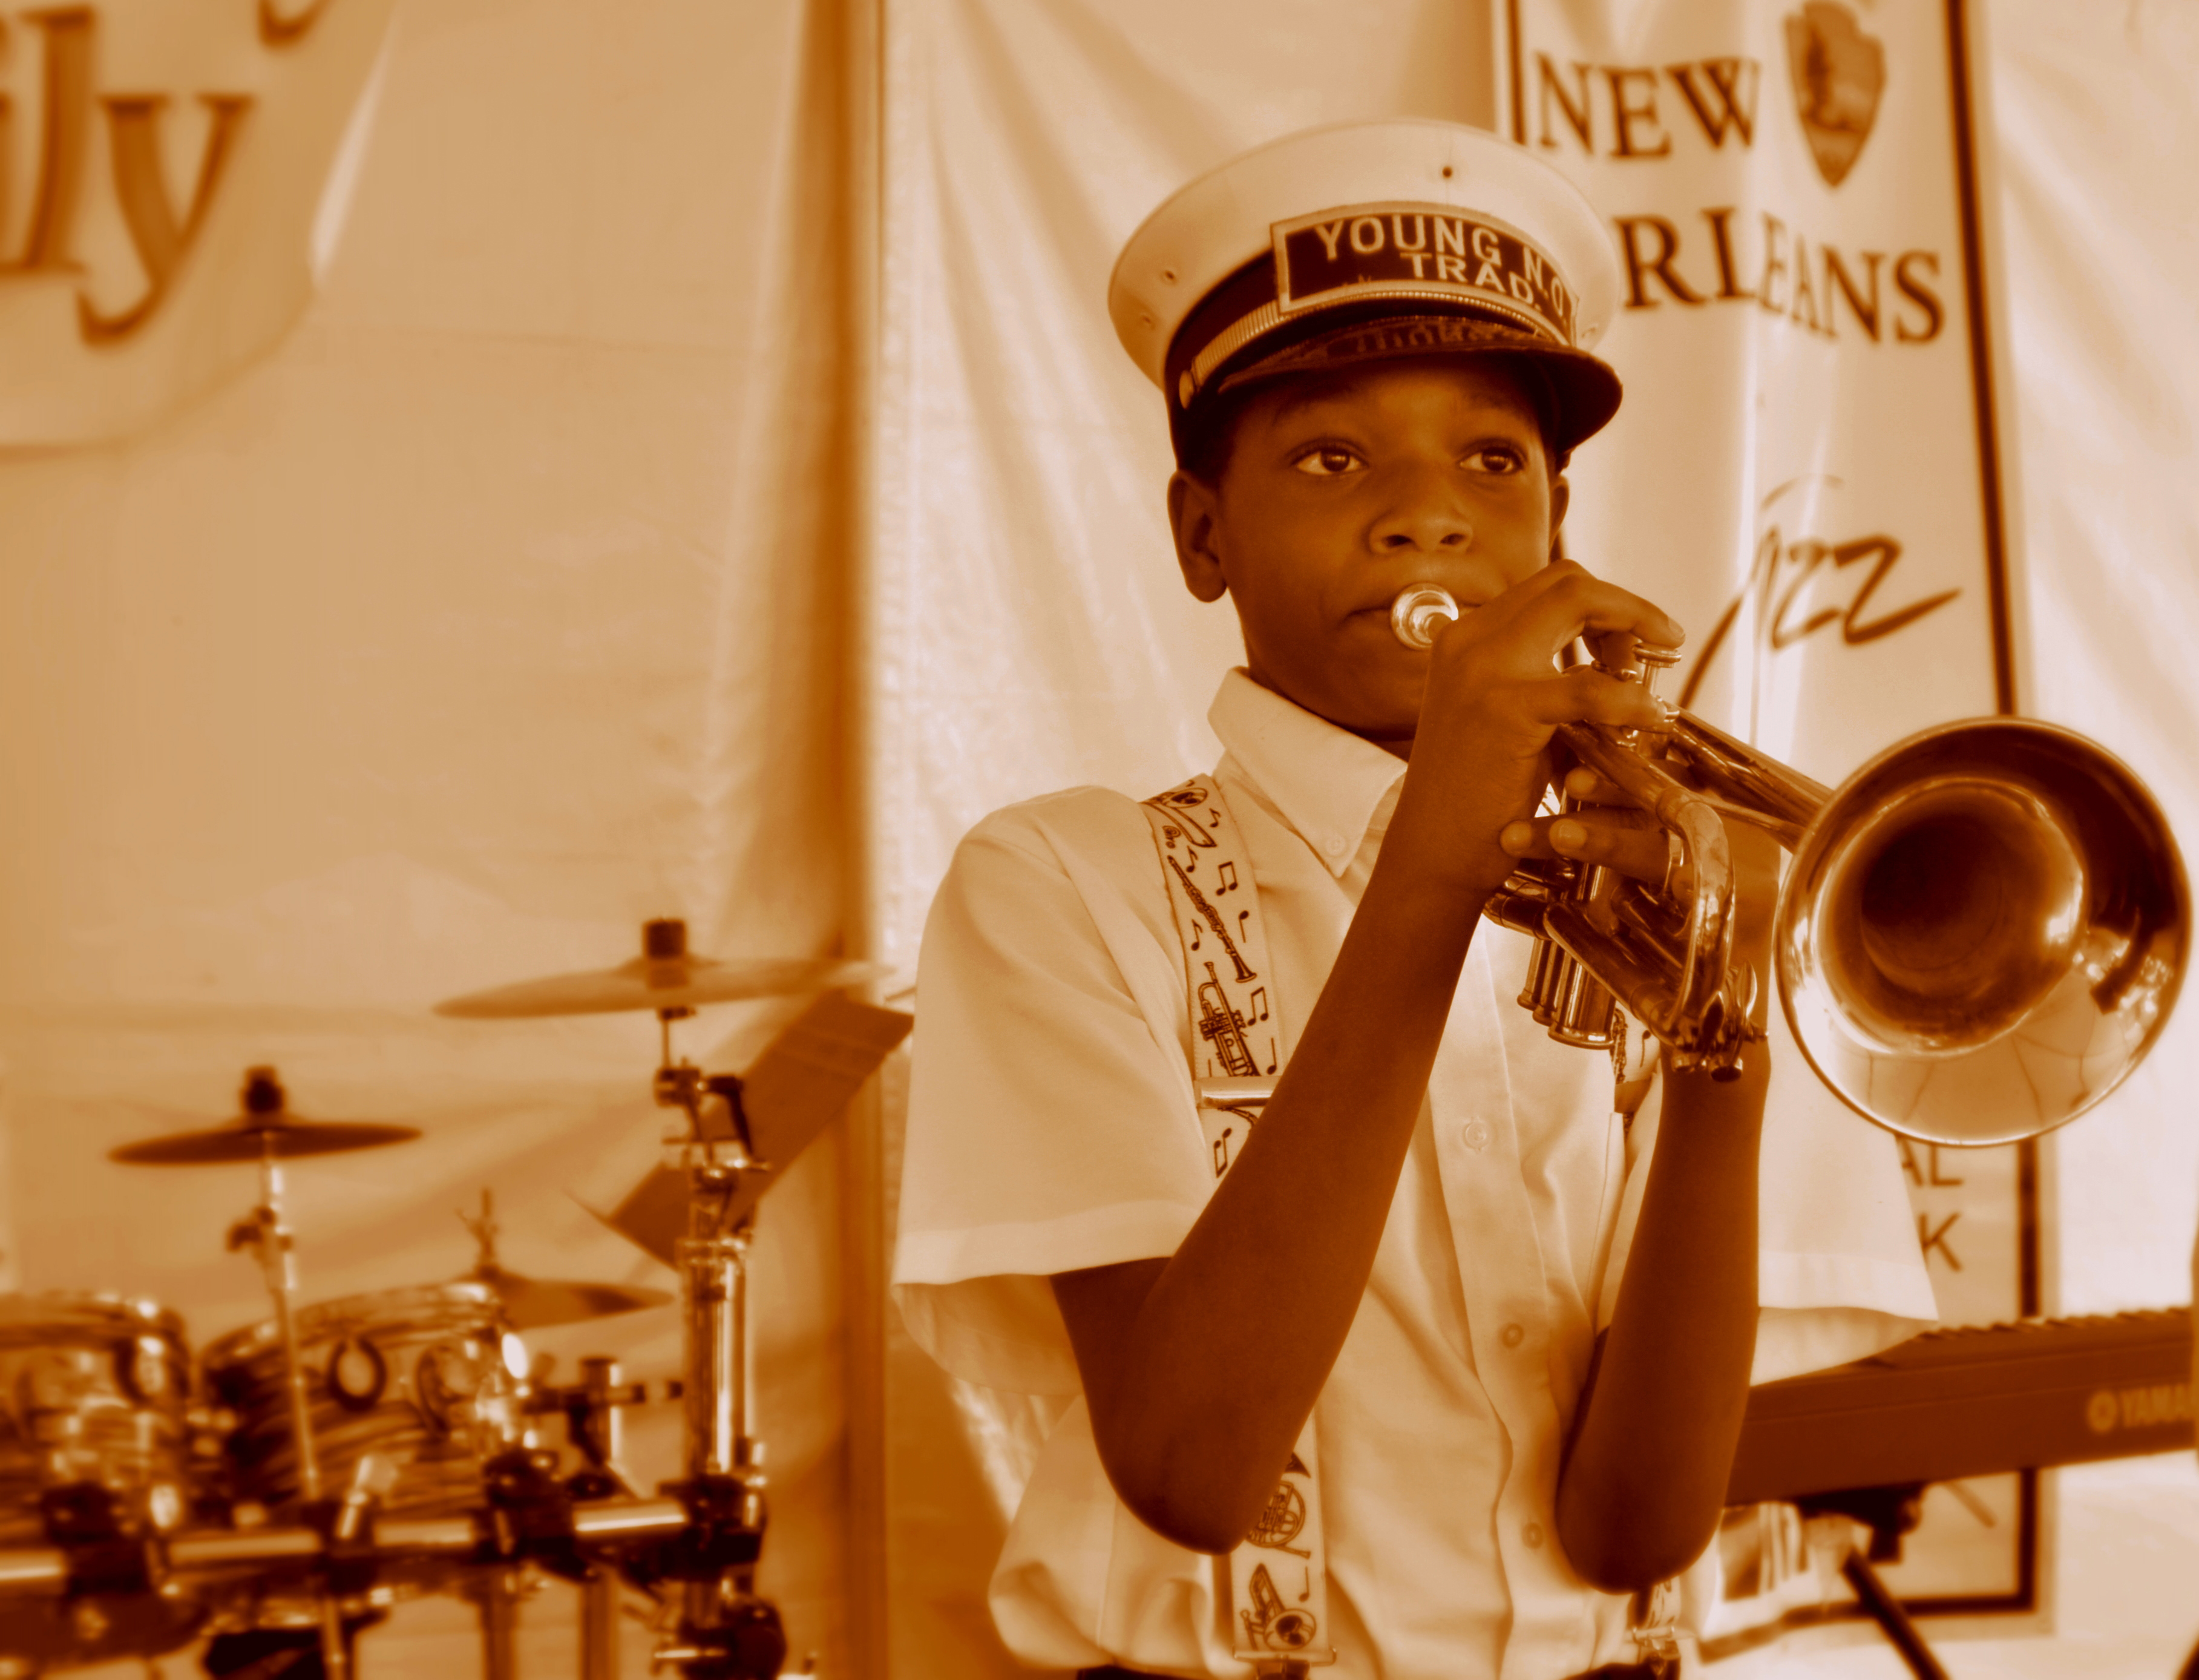 A young brass band musician plays a trumpet